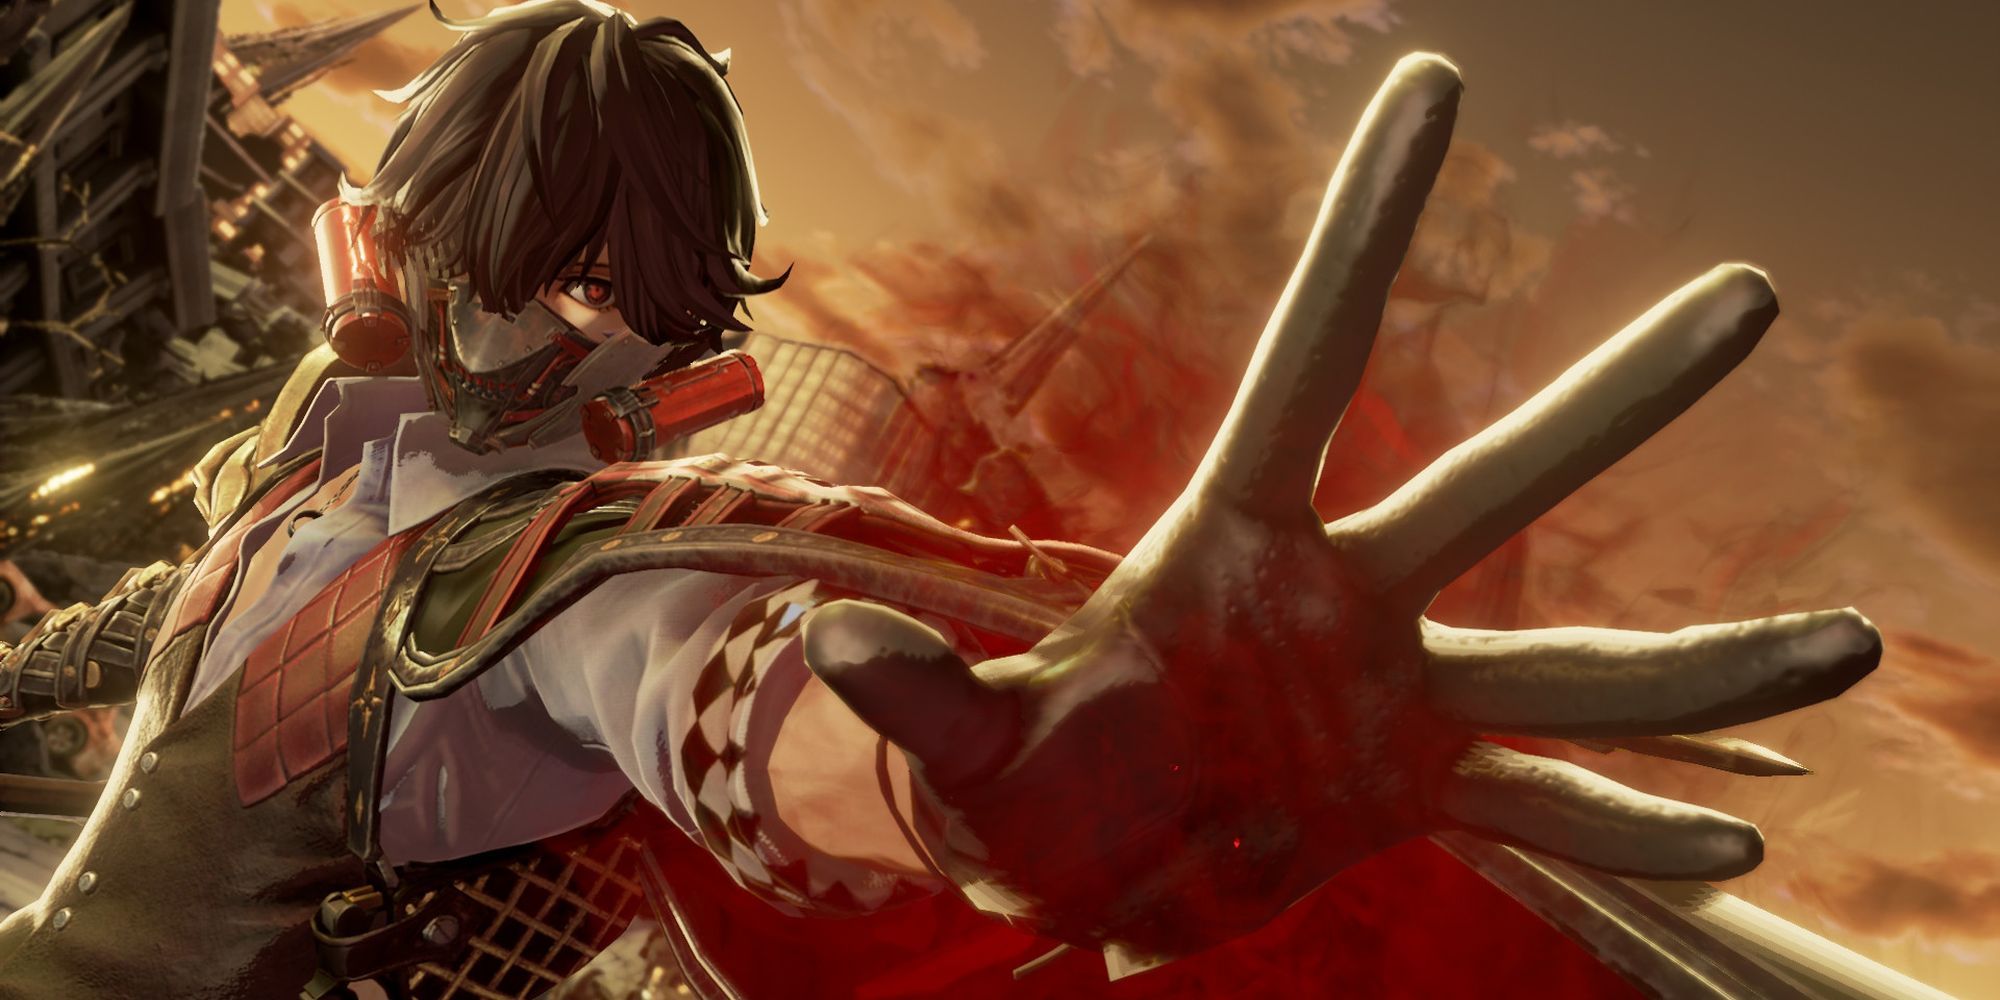 A cutscene image of draining blood from Code Vein.